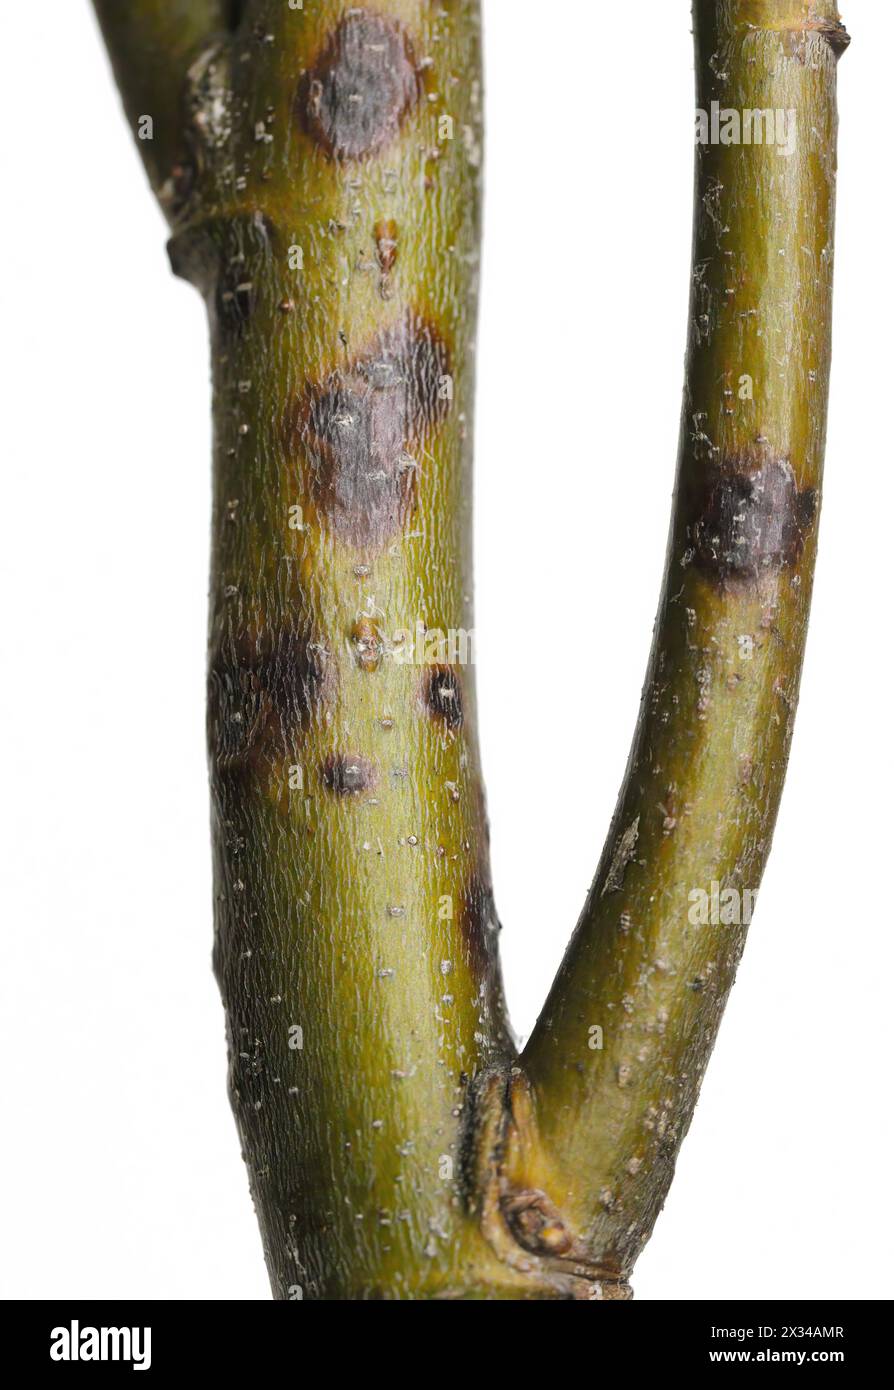 A branch of a linden (Tilia) tree with symptoms of disease - Canker, cancer. Golden Chain (Laburnum) Fusarium Canker. Caused by a complex of fungus. Stock Photo